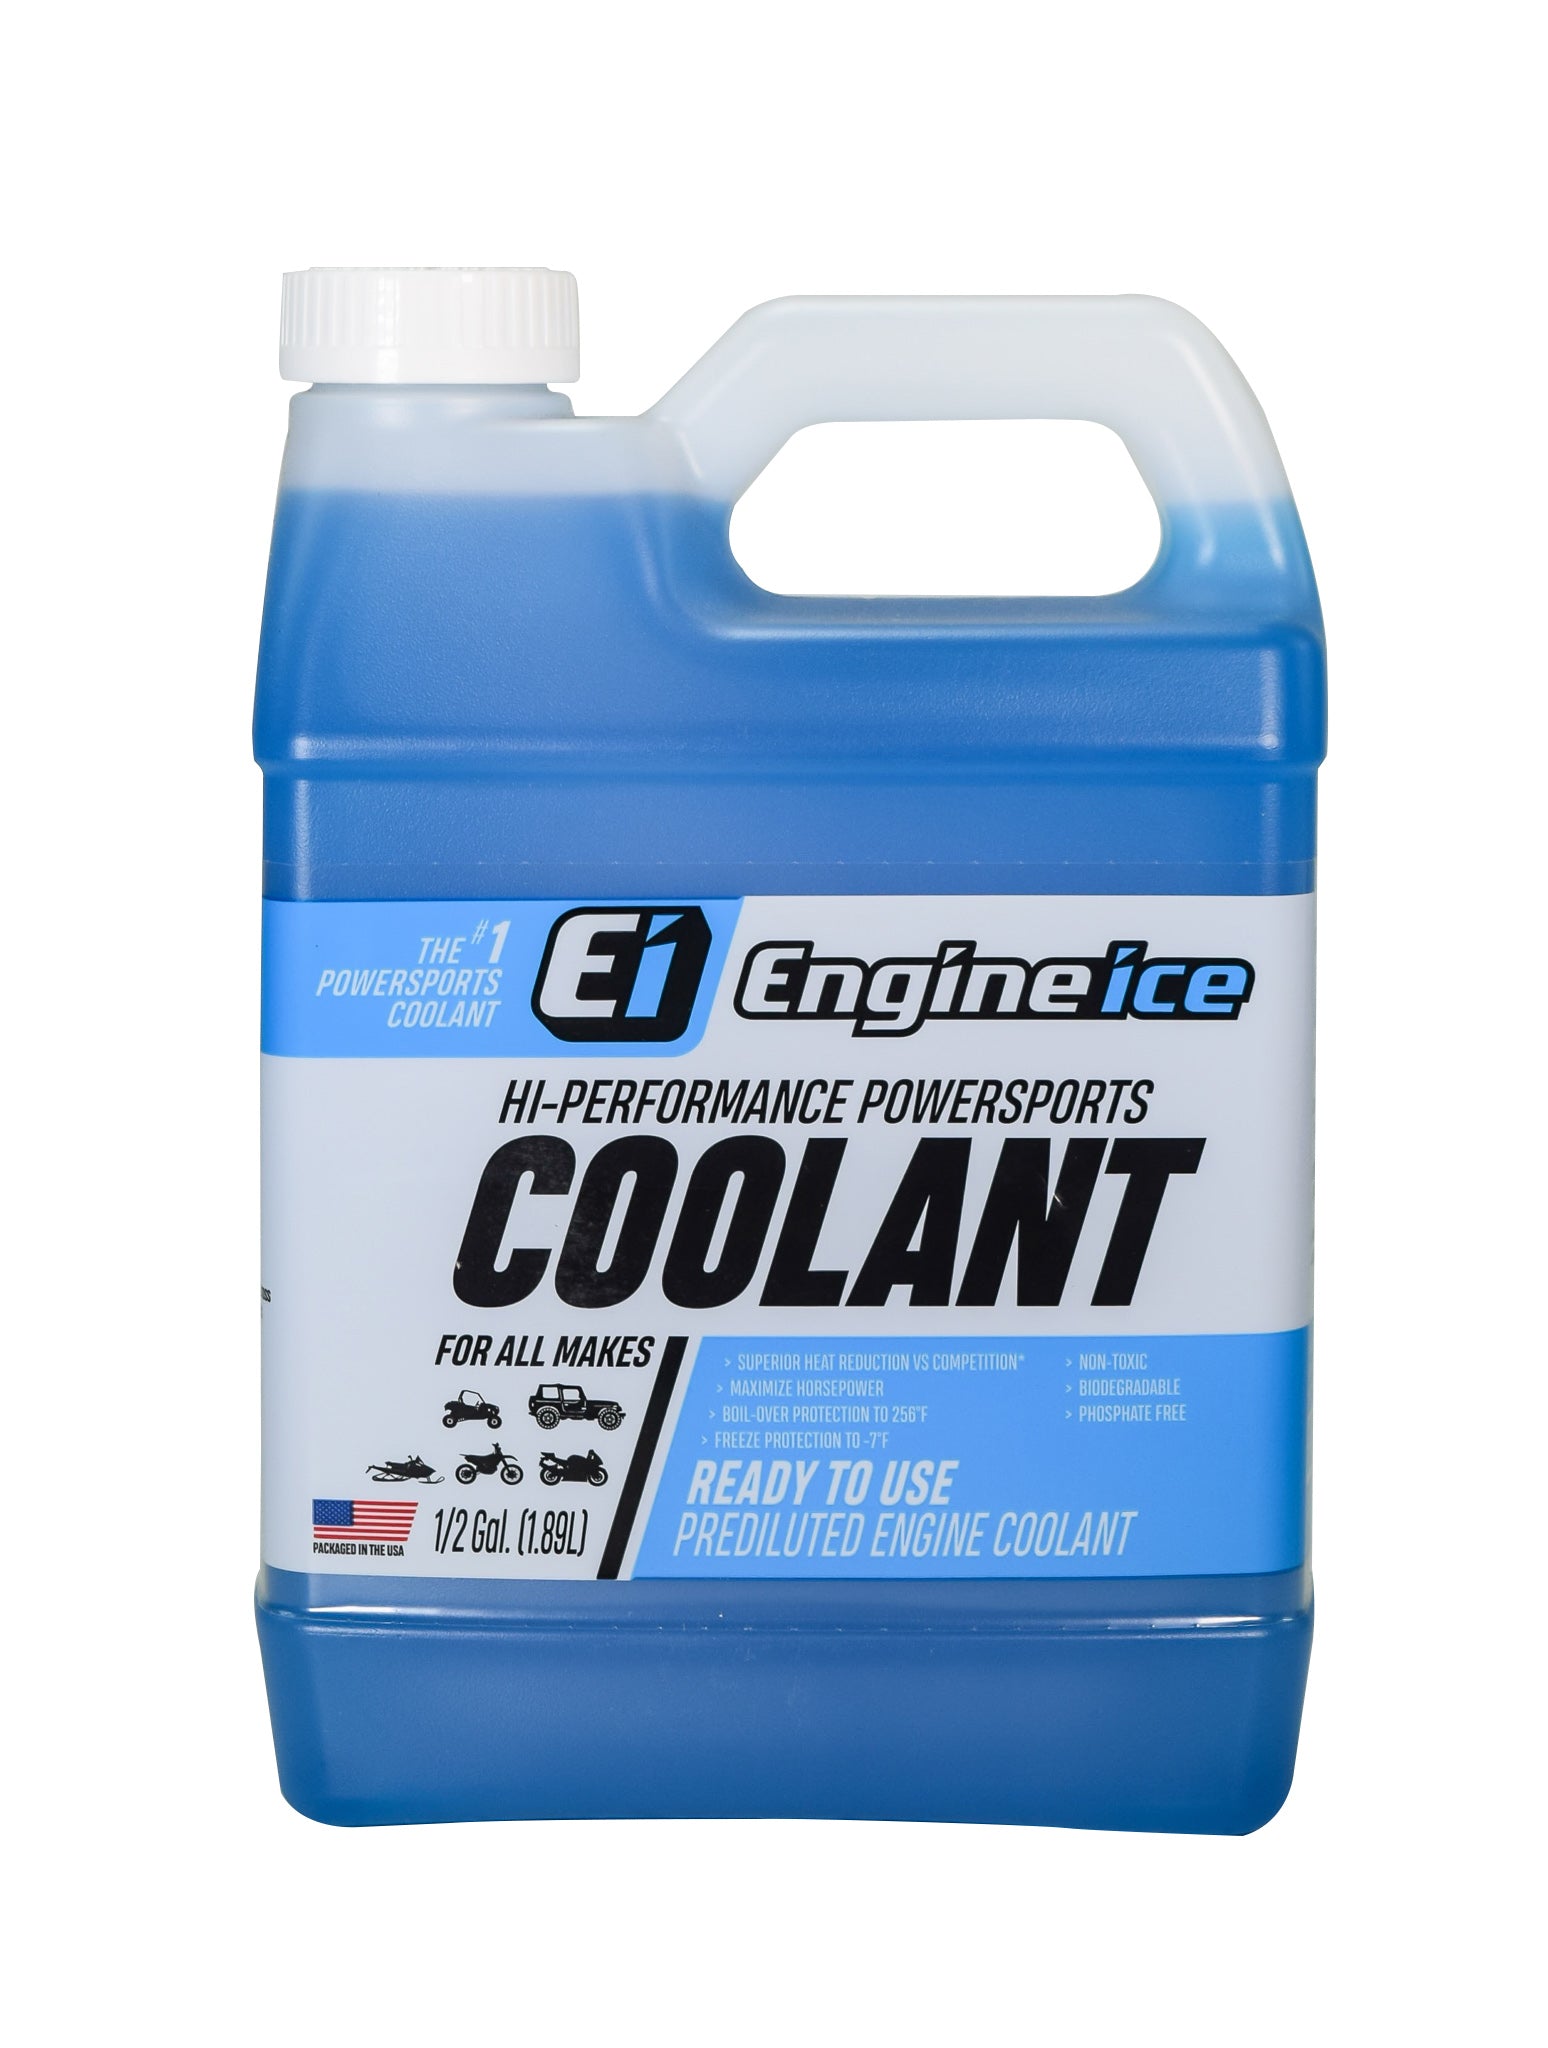 Engine Ice TYDS008-03 High Performance Coolant, 0.5 gallon, 2 Pack